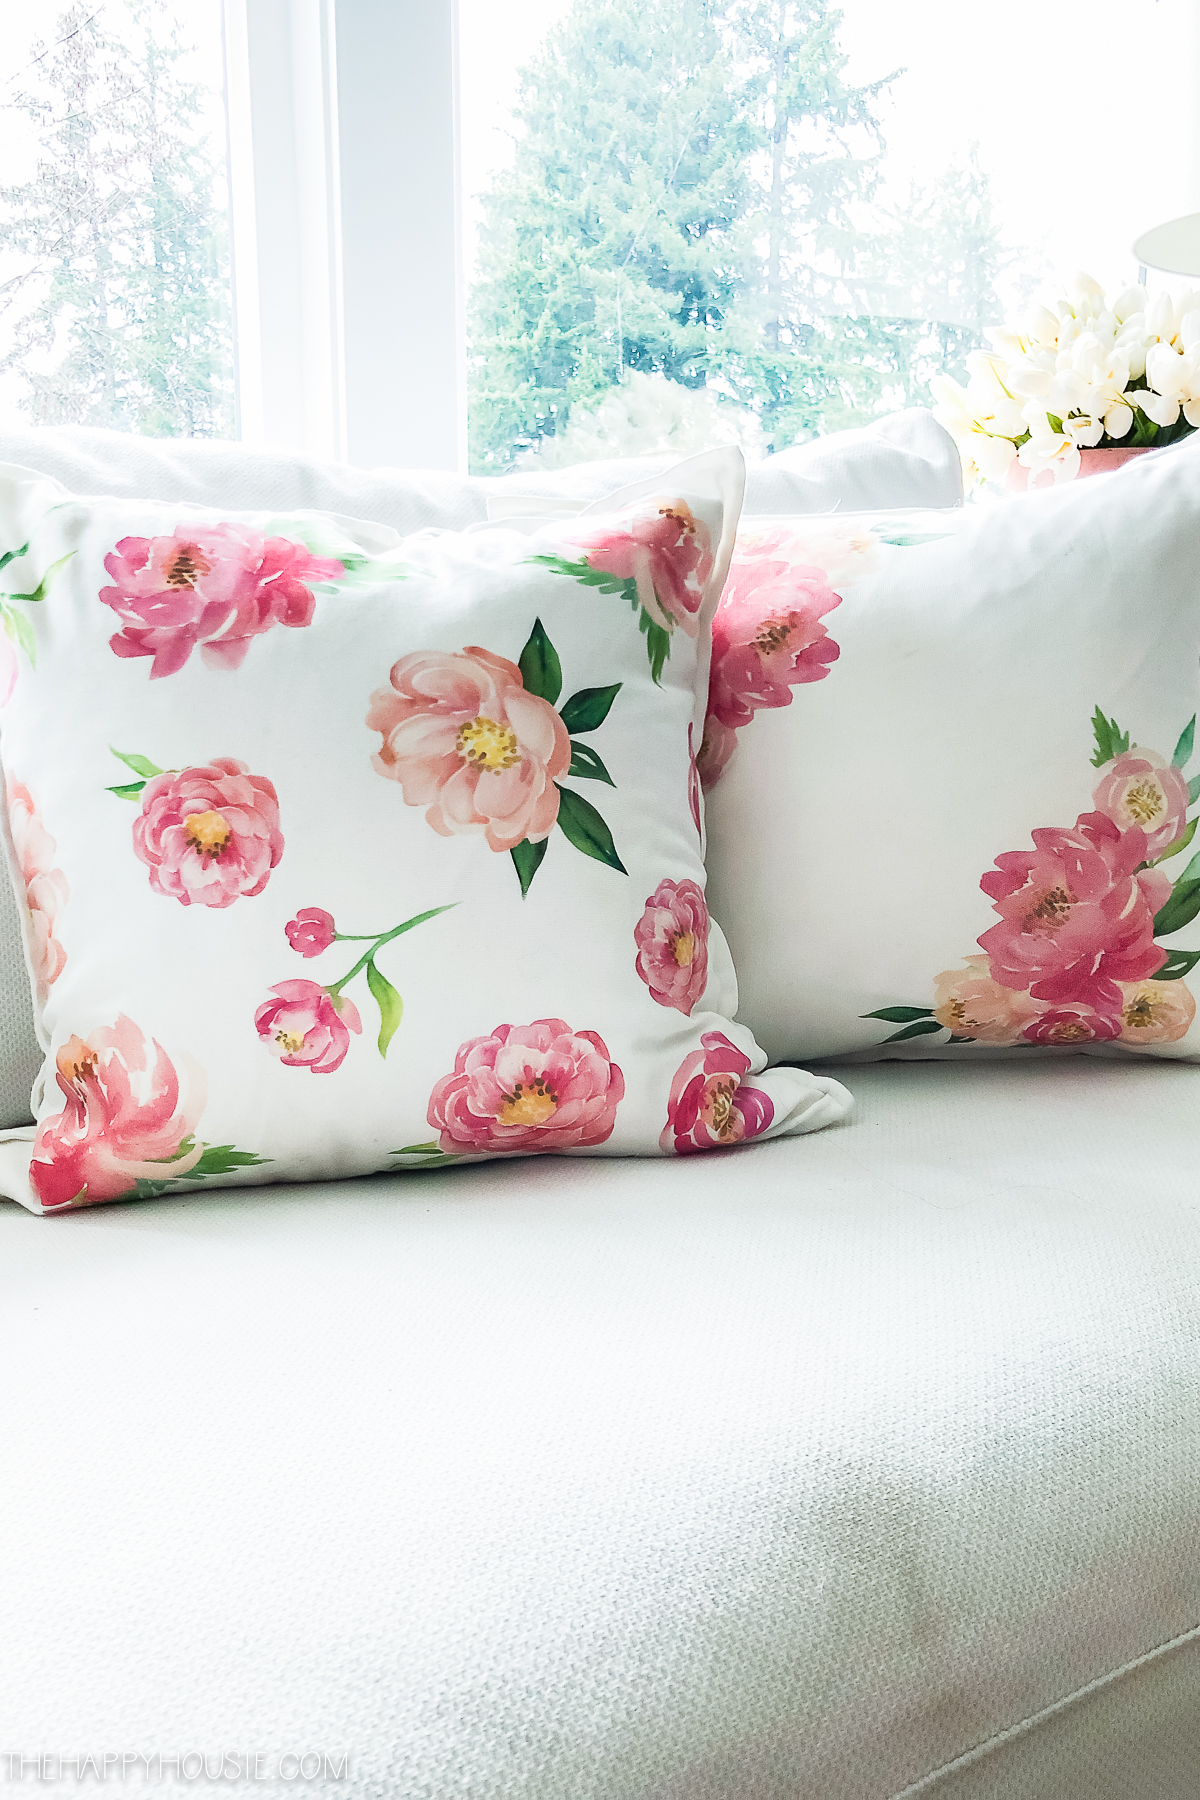 Floral throw pillows with pink flowers.